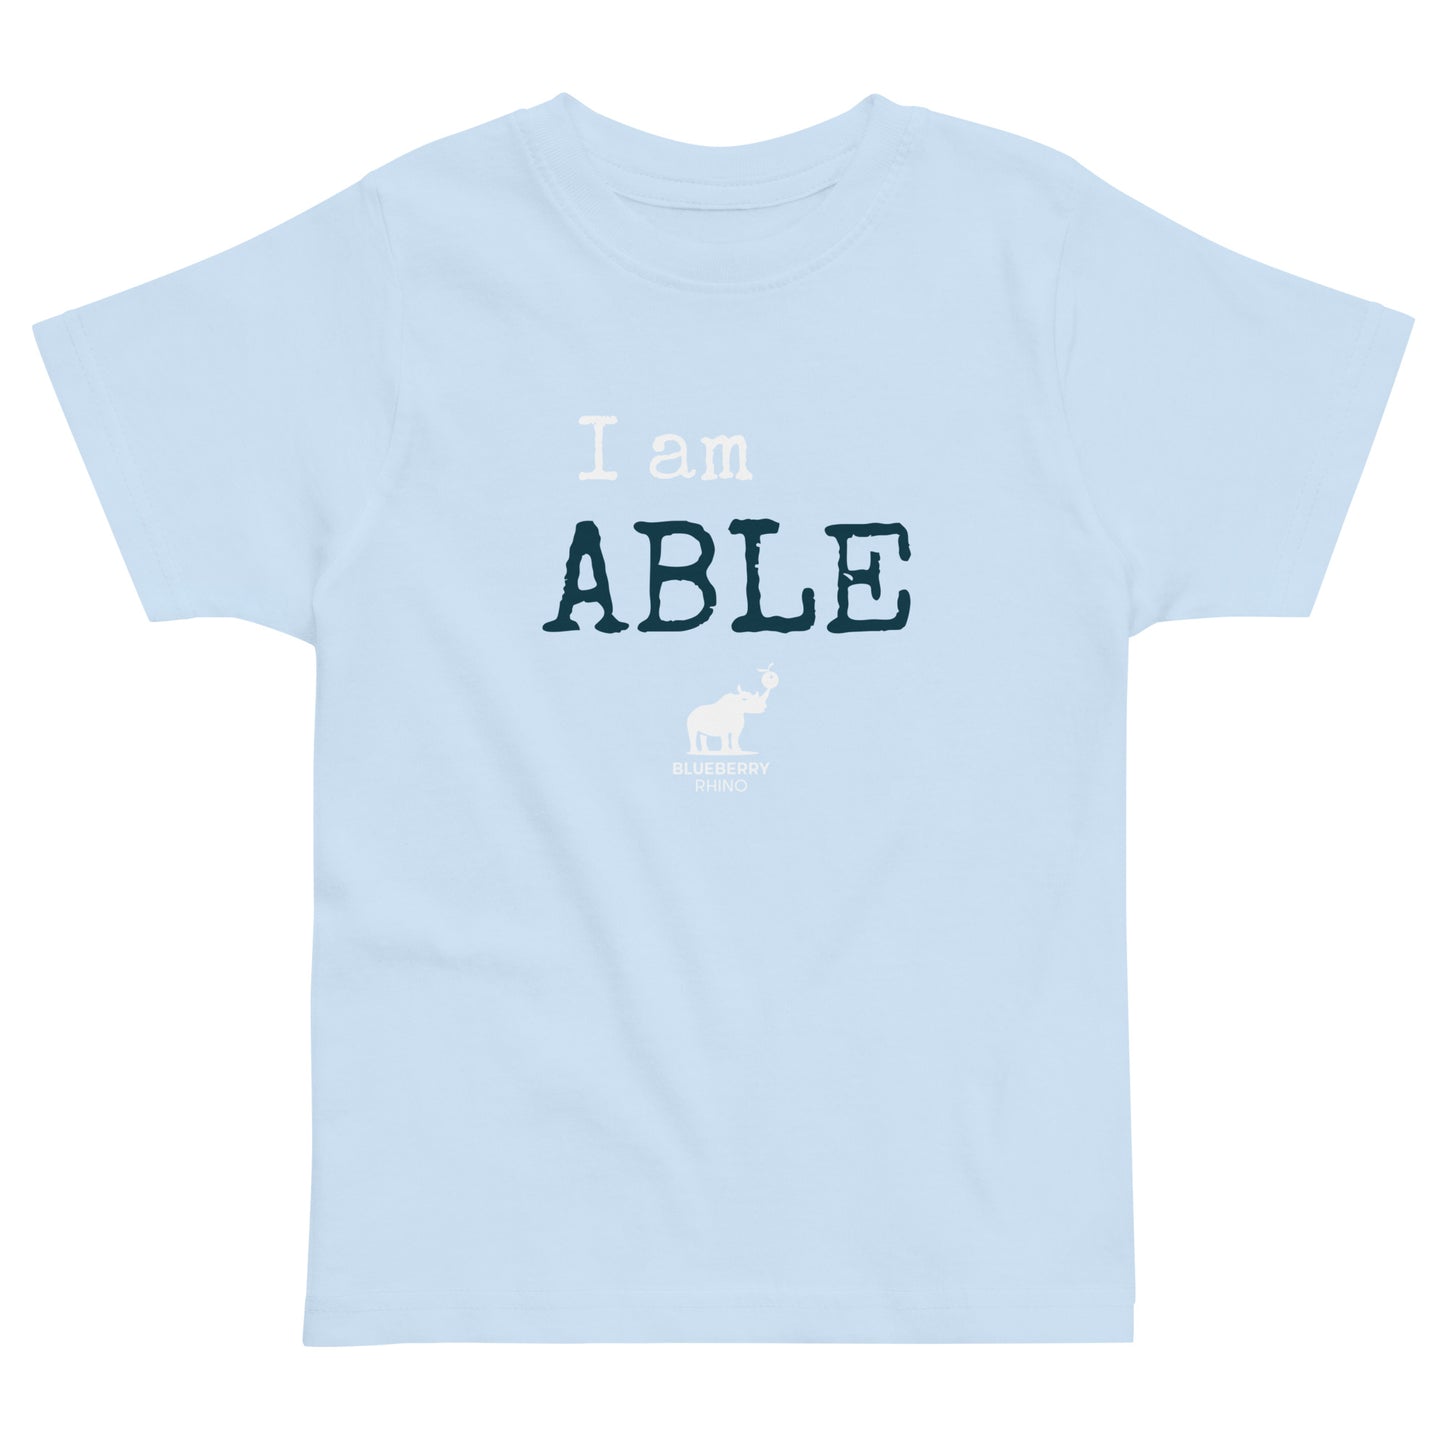 I am ABLE - Toddler jersey t-shirt